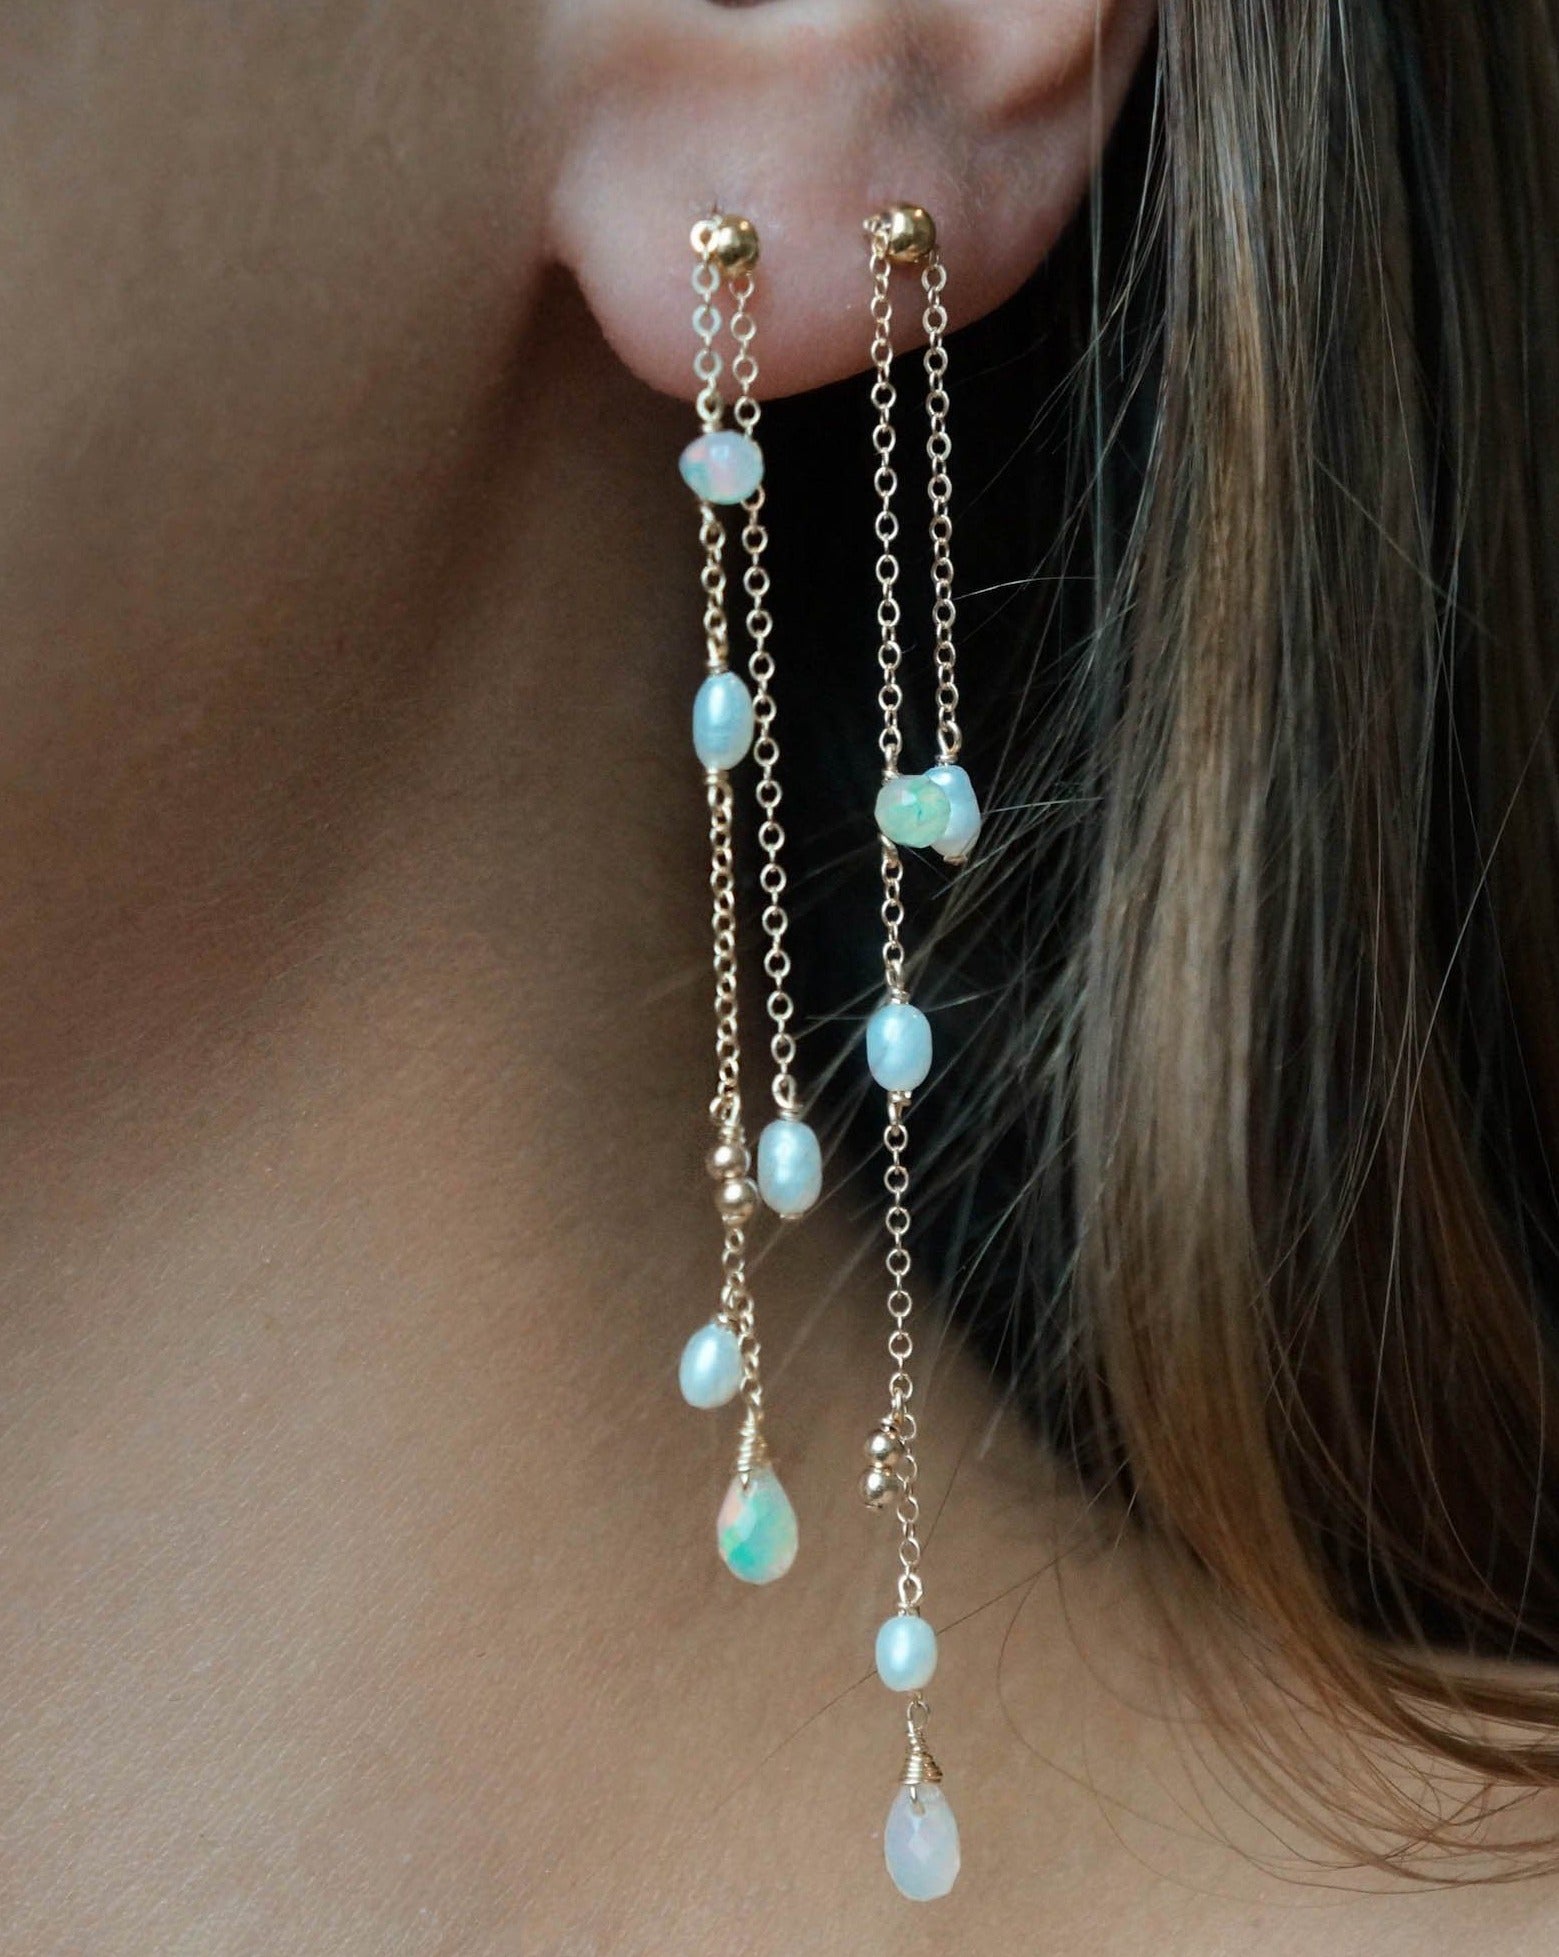 Shasta Earrings by KOZAKH. 1 3/4 inches long dangling earrings, crafted in 14K Gold Filled, featuring 3-4mm White rice beads and 5-6mm Faceted Ethiopian Opal droplets.